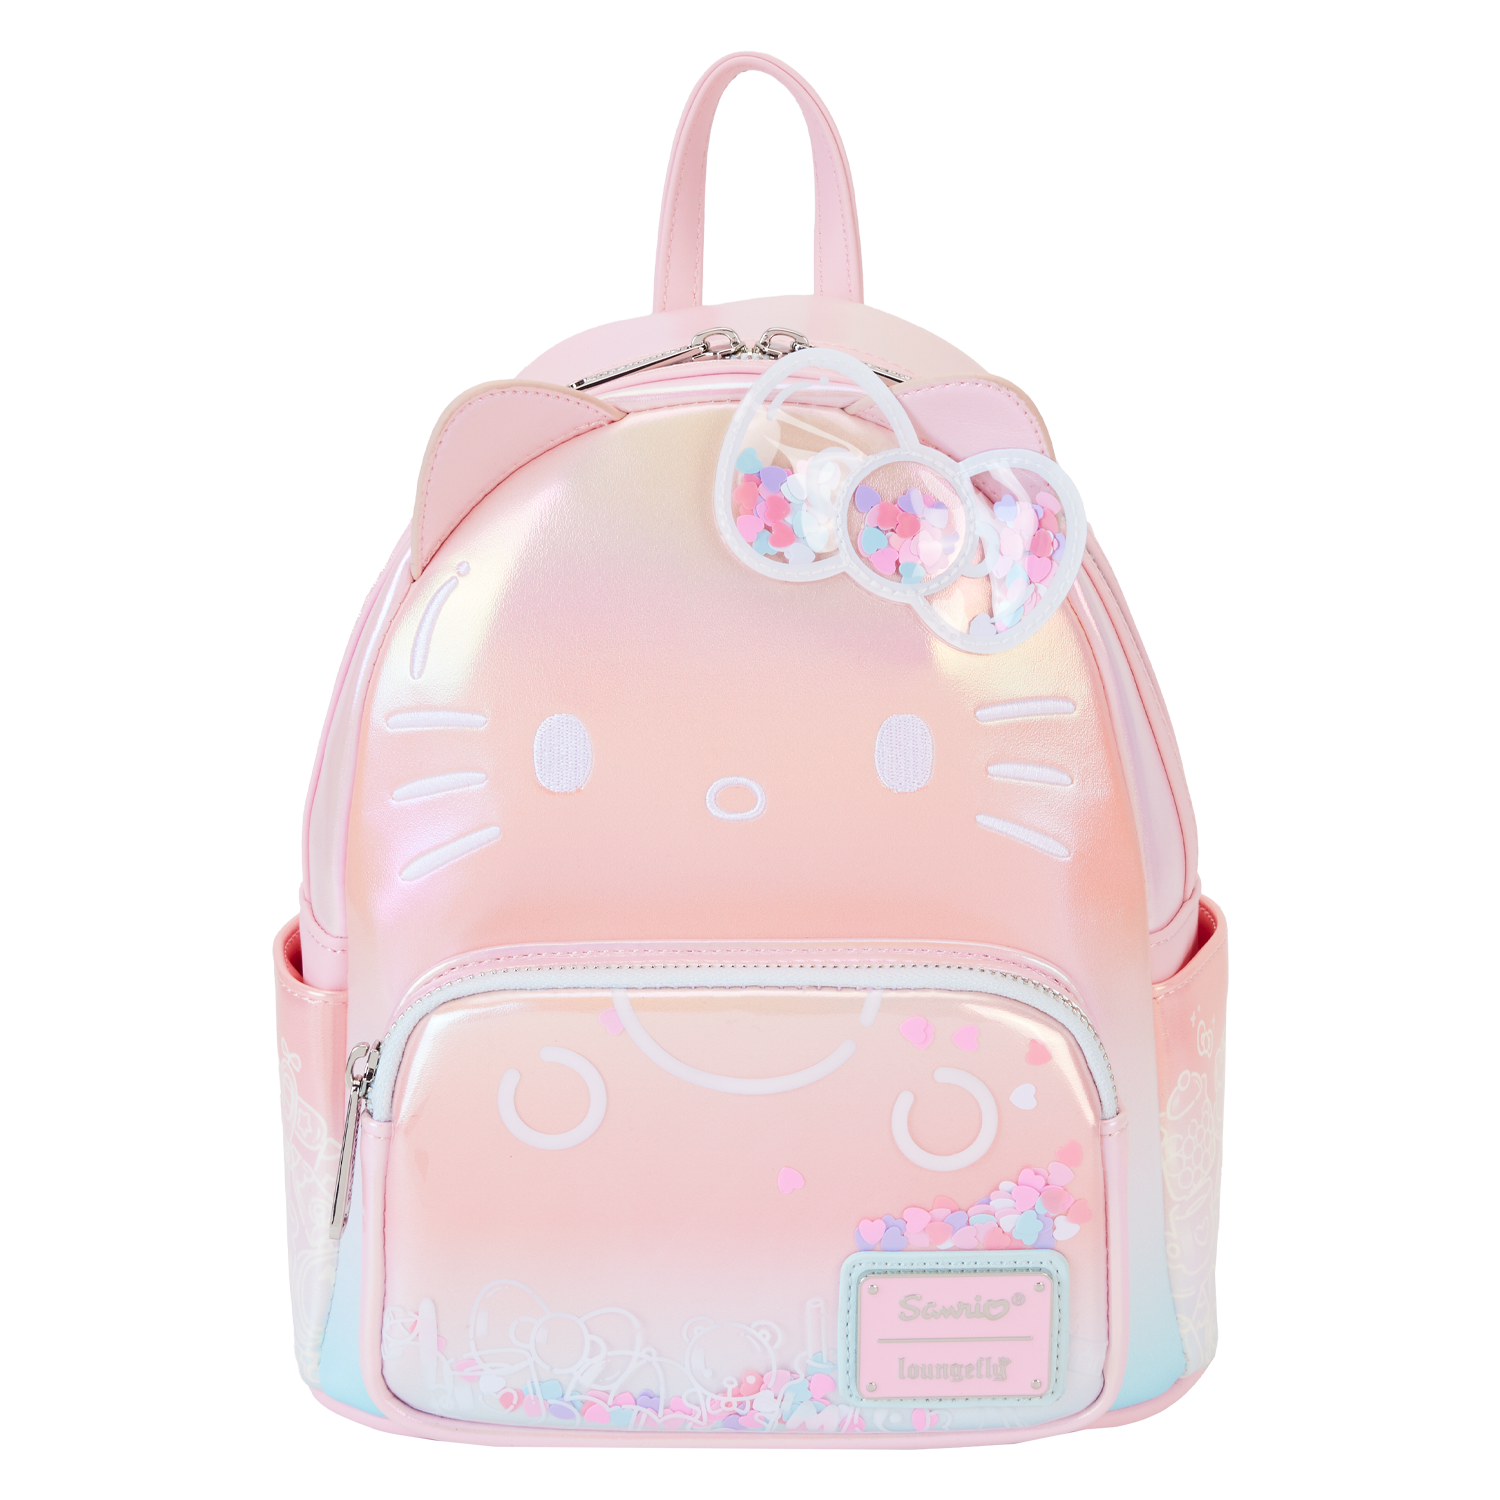 Hello Kitty x Loungefly 50th Anniv. Clear & Cute Mini Backpack Bags Loungefly   